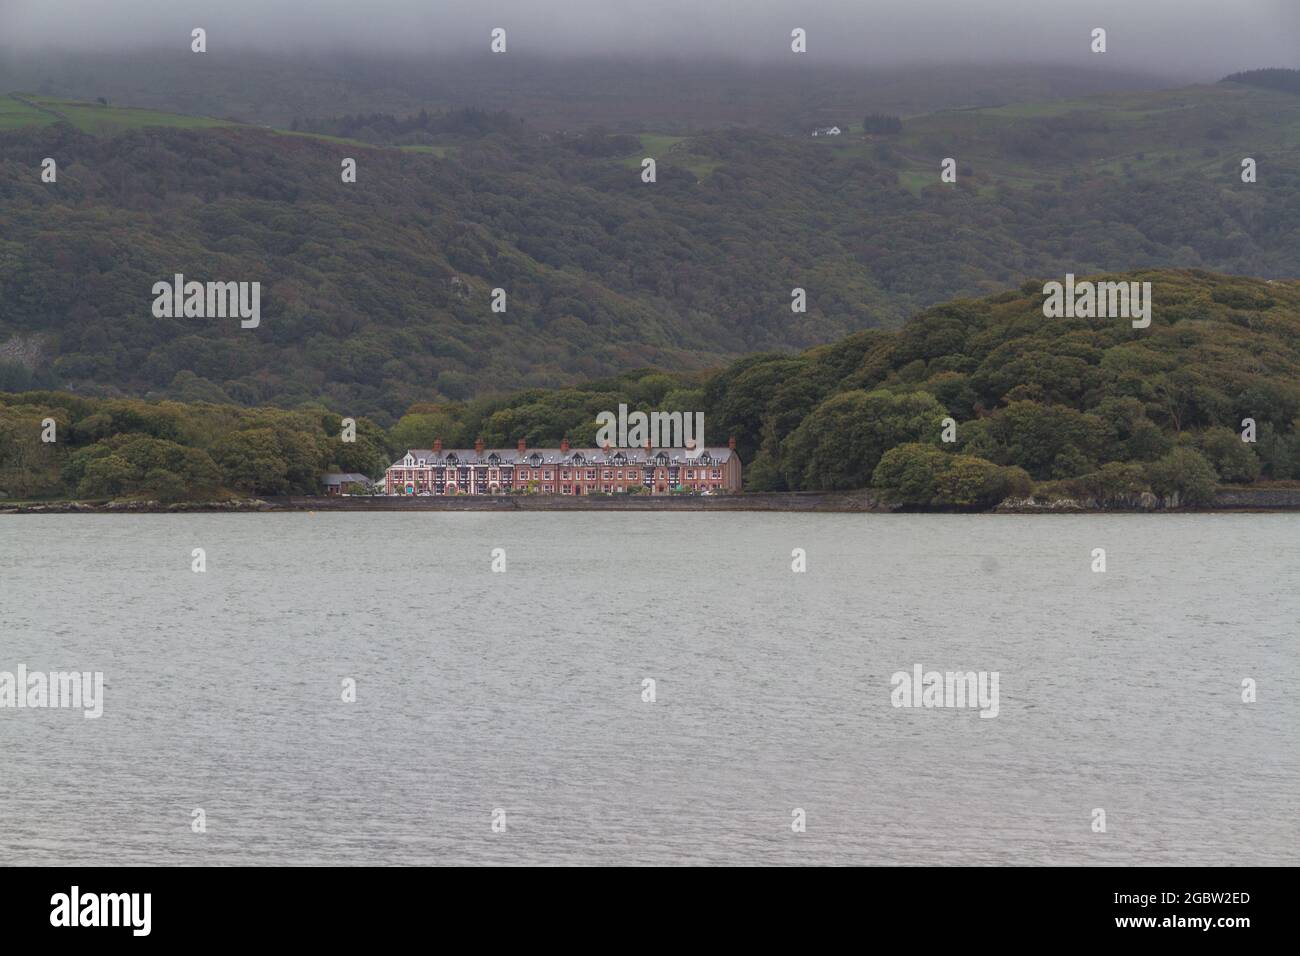 View over the Mawddach Estuary in poor weather. Barmouth, Gwynedd, North Wales, UK Stock Photo